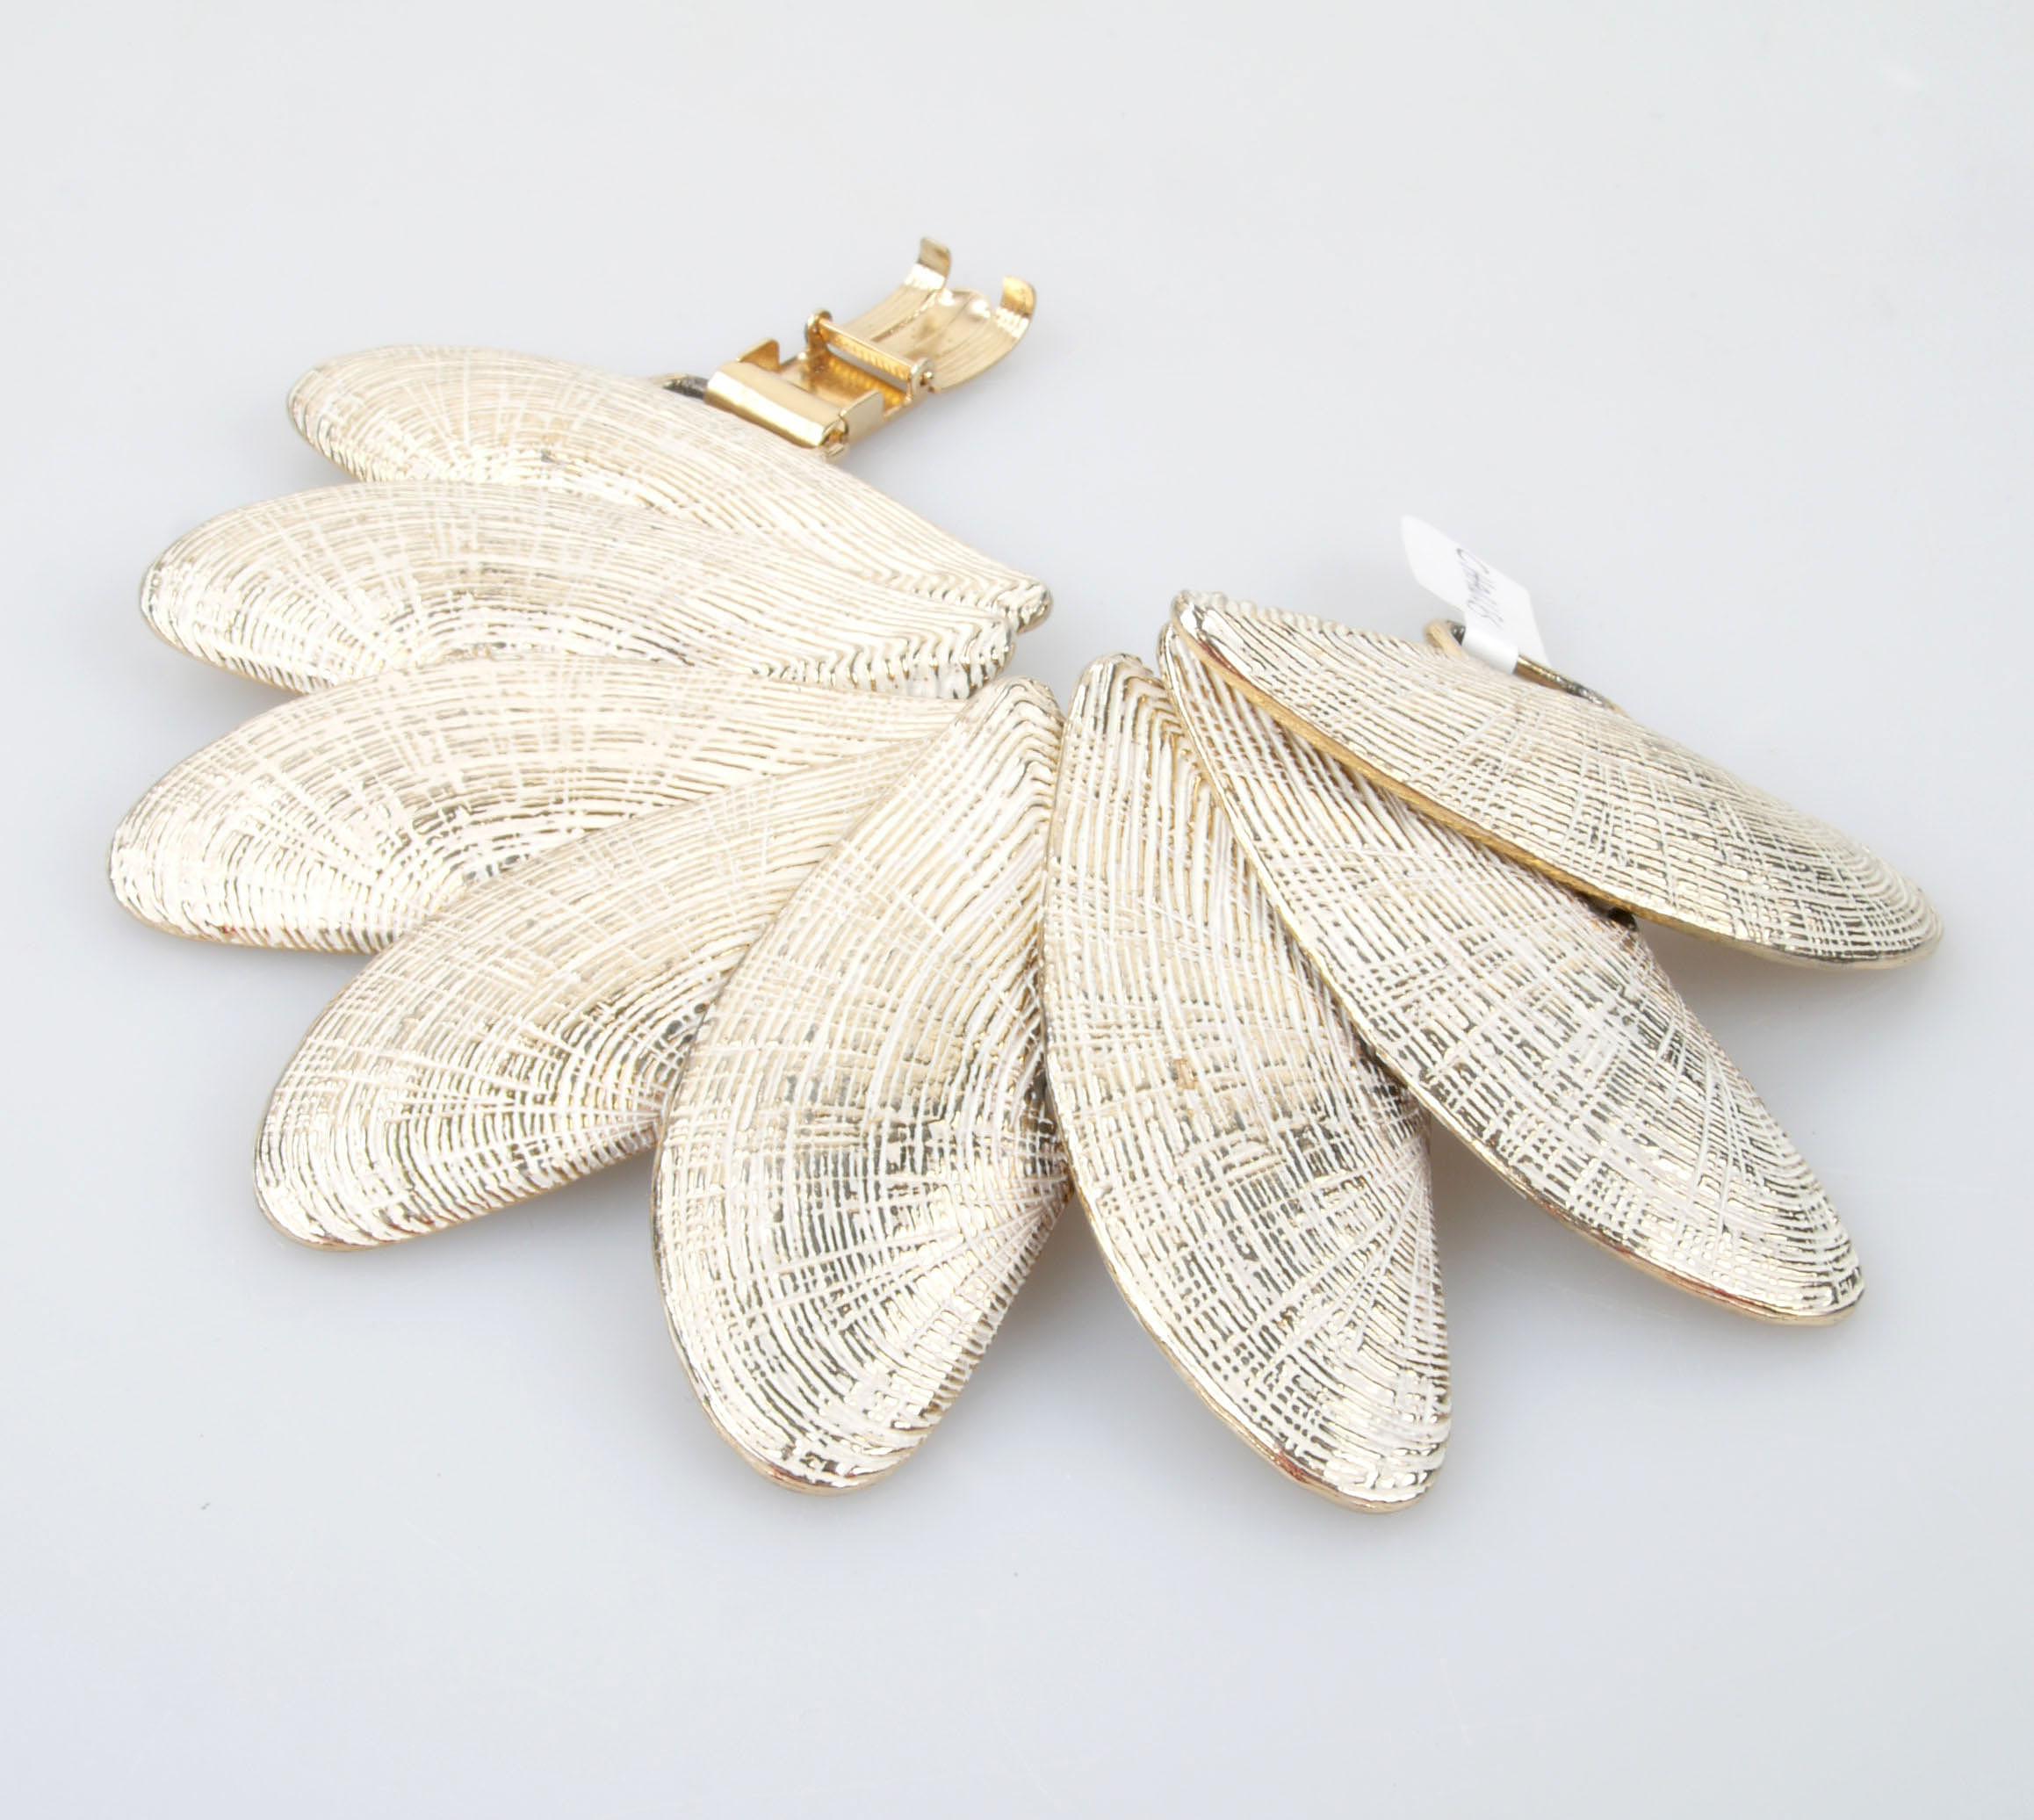 White and gold tone seashell bracelet with fold-over clasp closure.